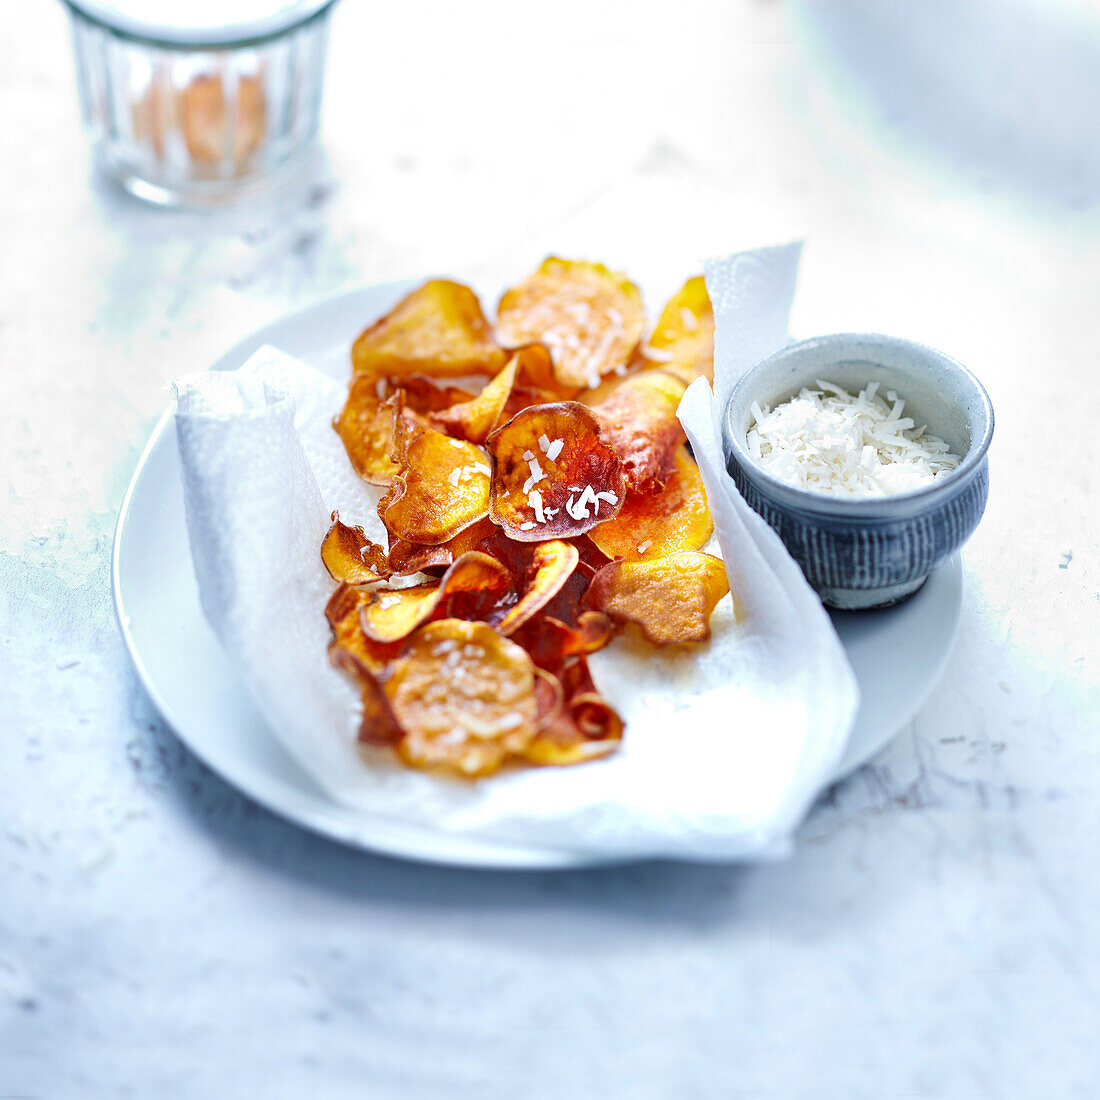 Sweet potato crisps sprinkled with grated coconut